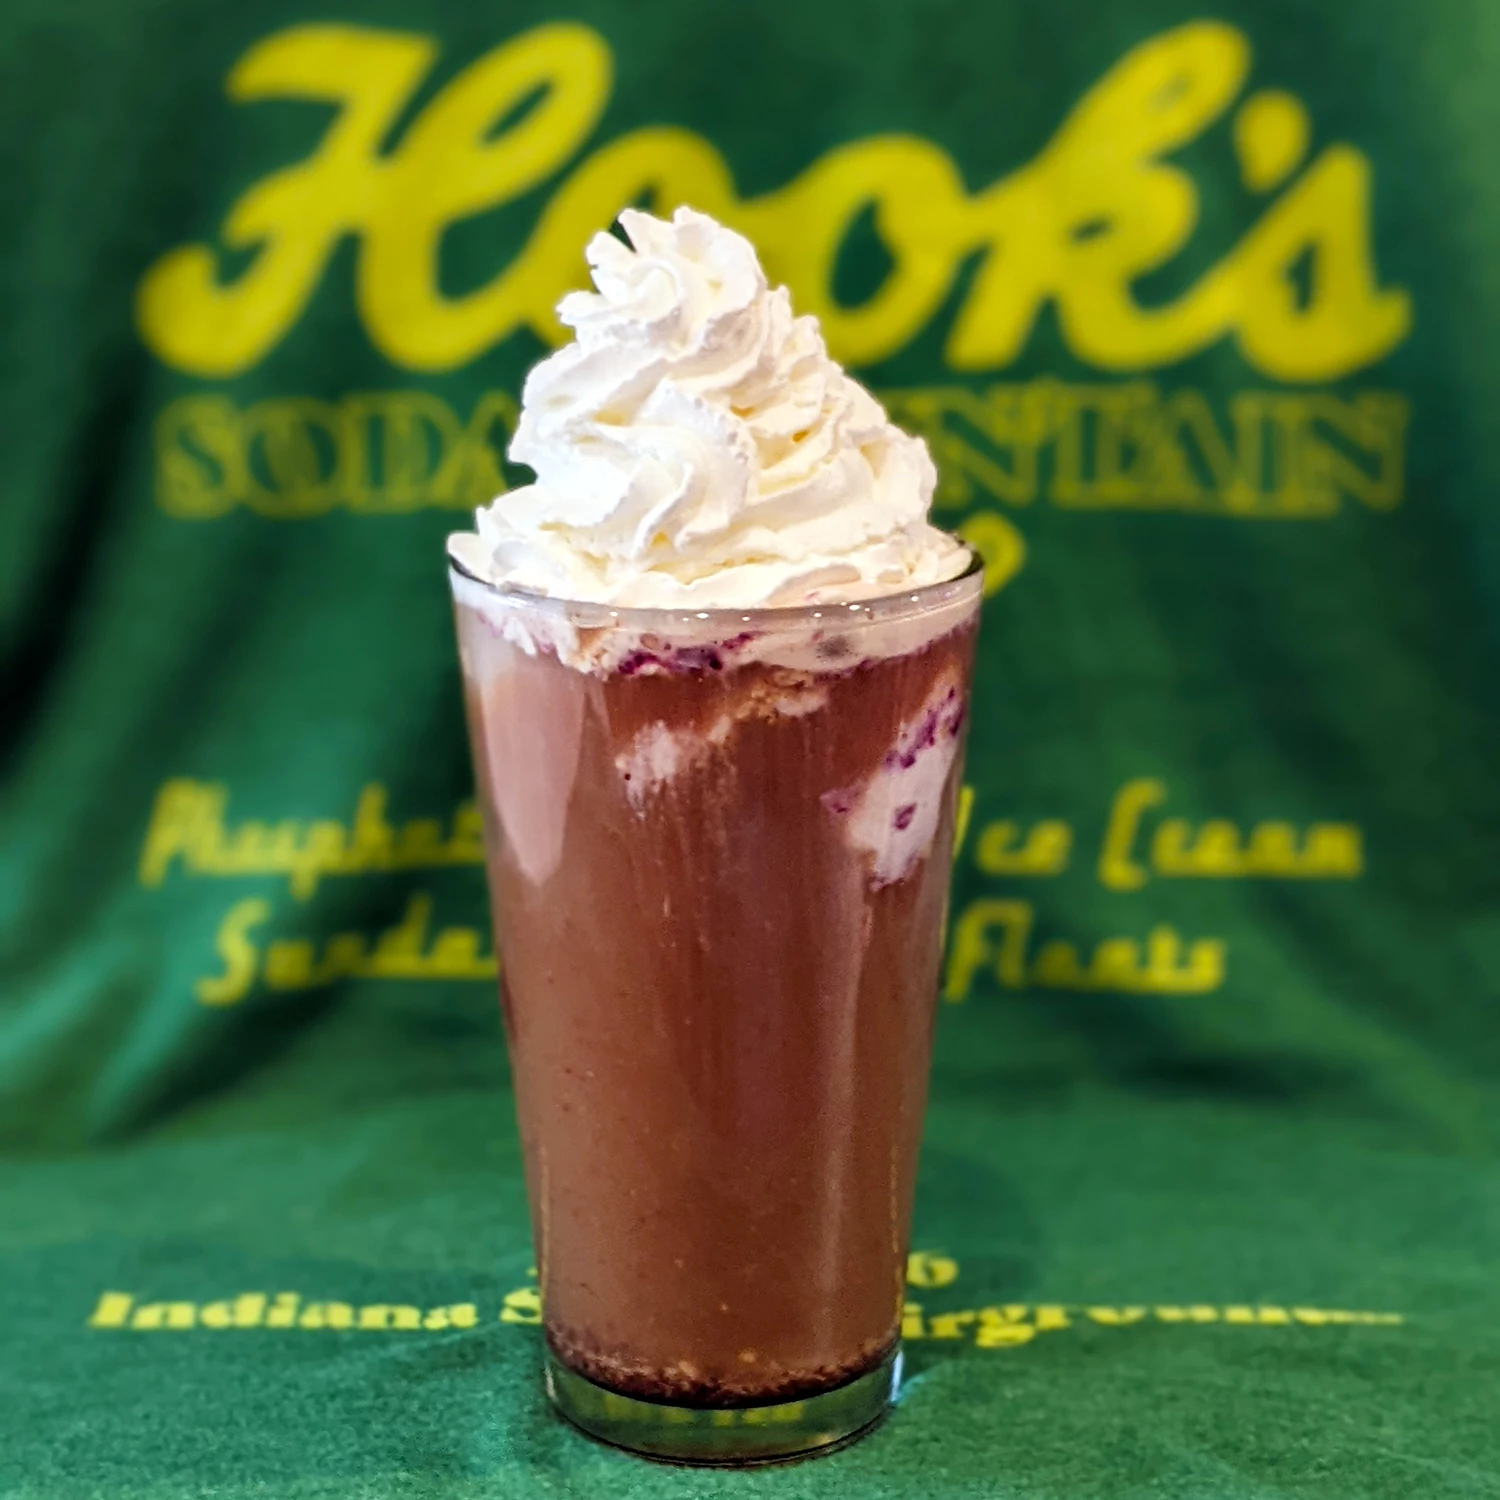 New Food & Drink Items Available at the 2022 Indiana State Fair